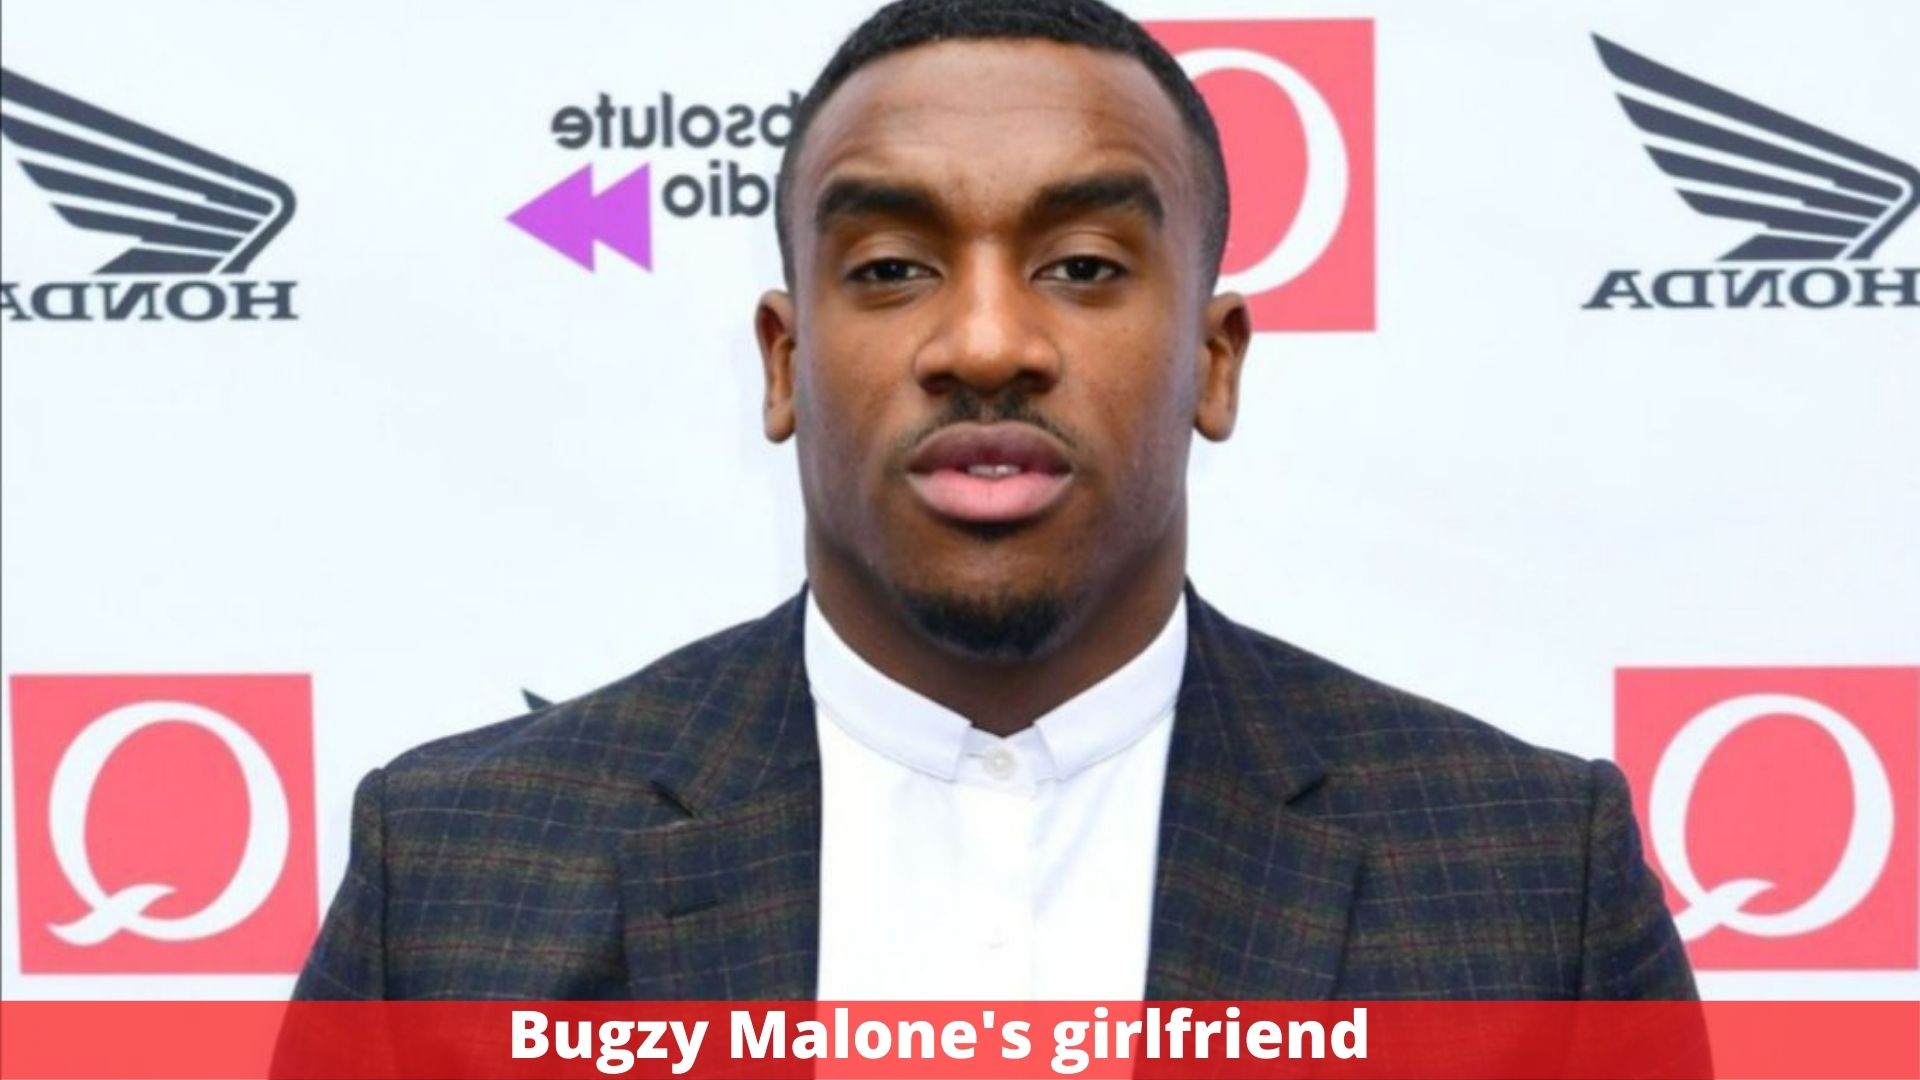 Bugzy Malone's girlfriend -Current Relationship Status, Biography, And Career